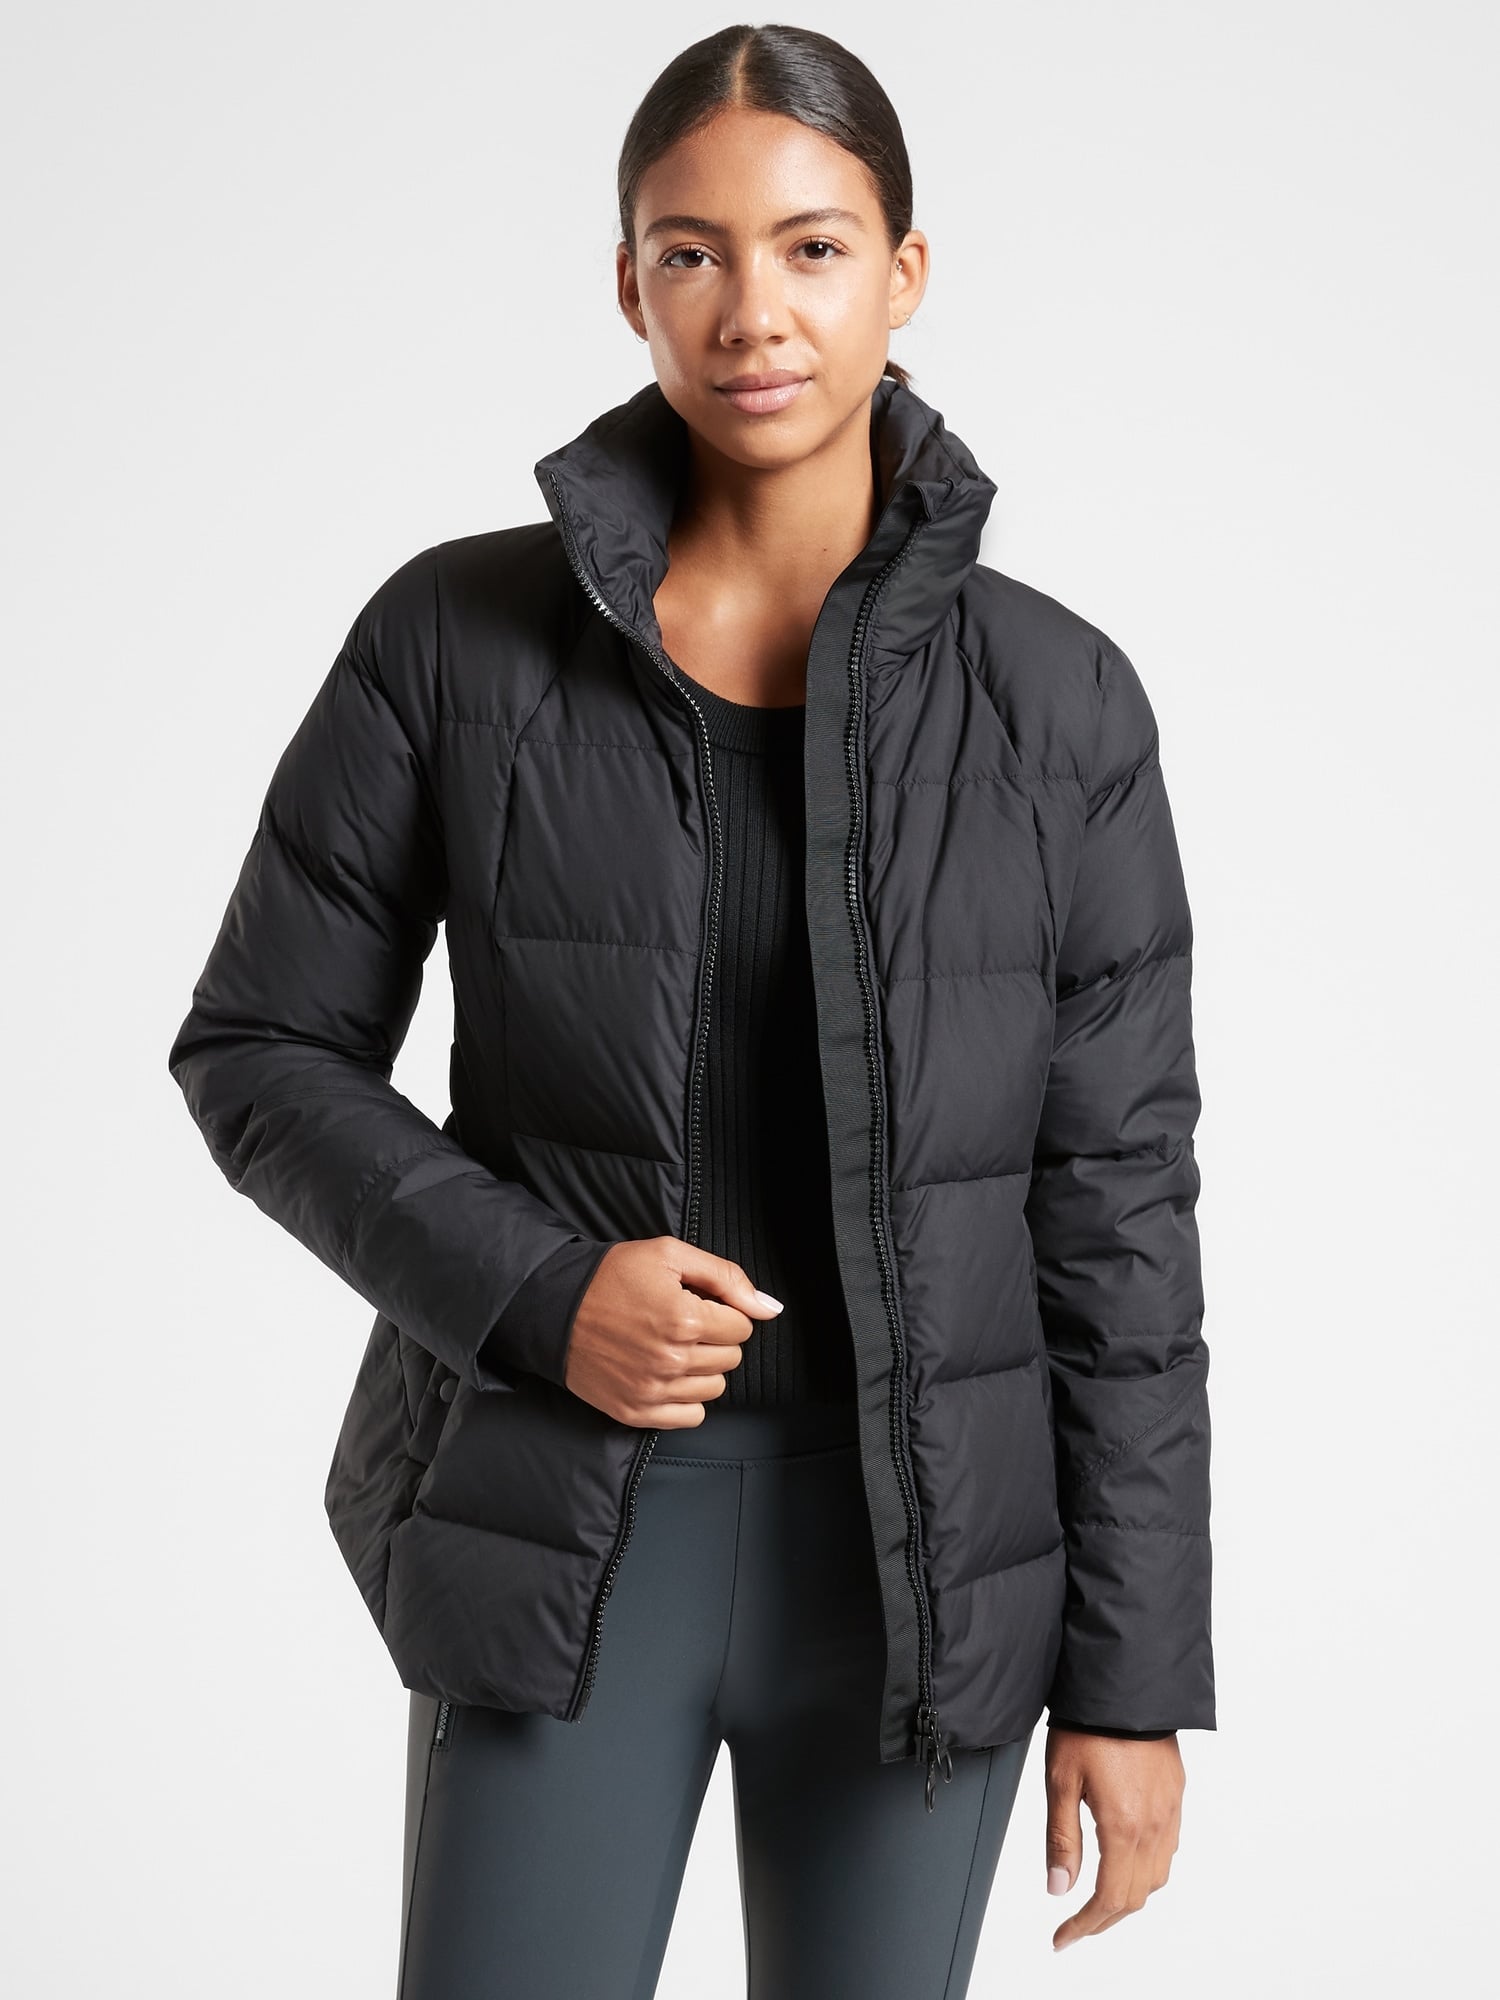 The Best Outerwear at Athleta | POPSUGAR Fitness